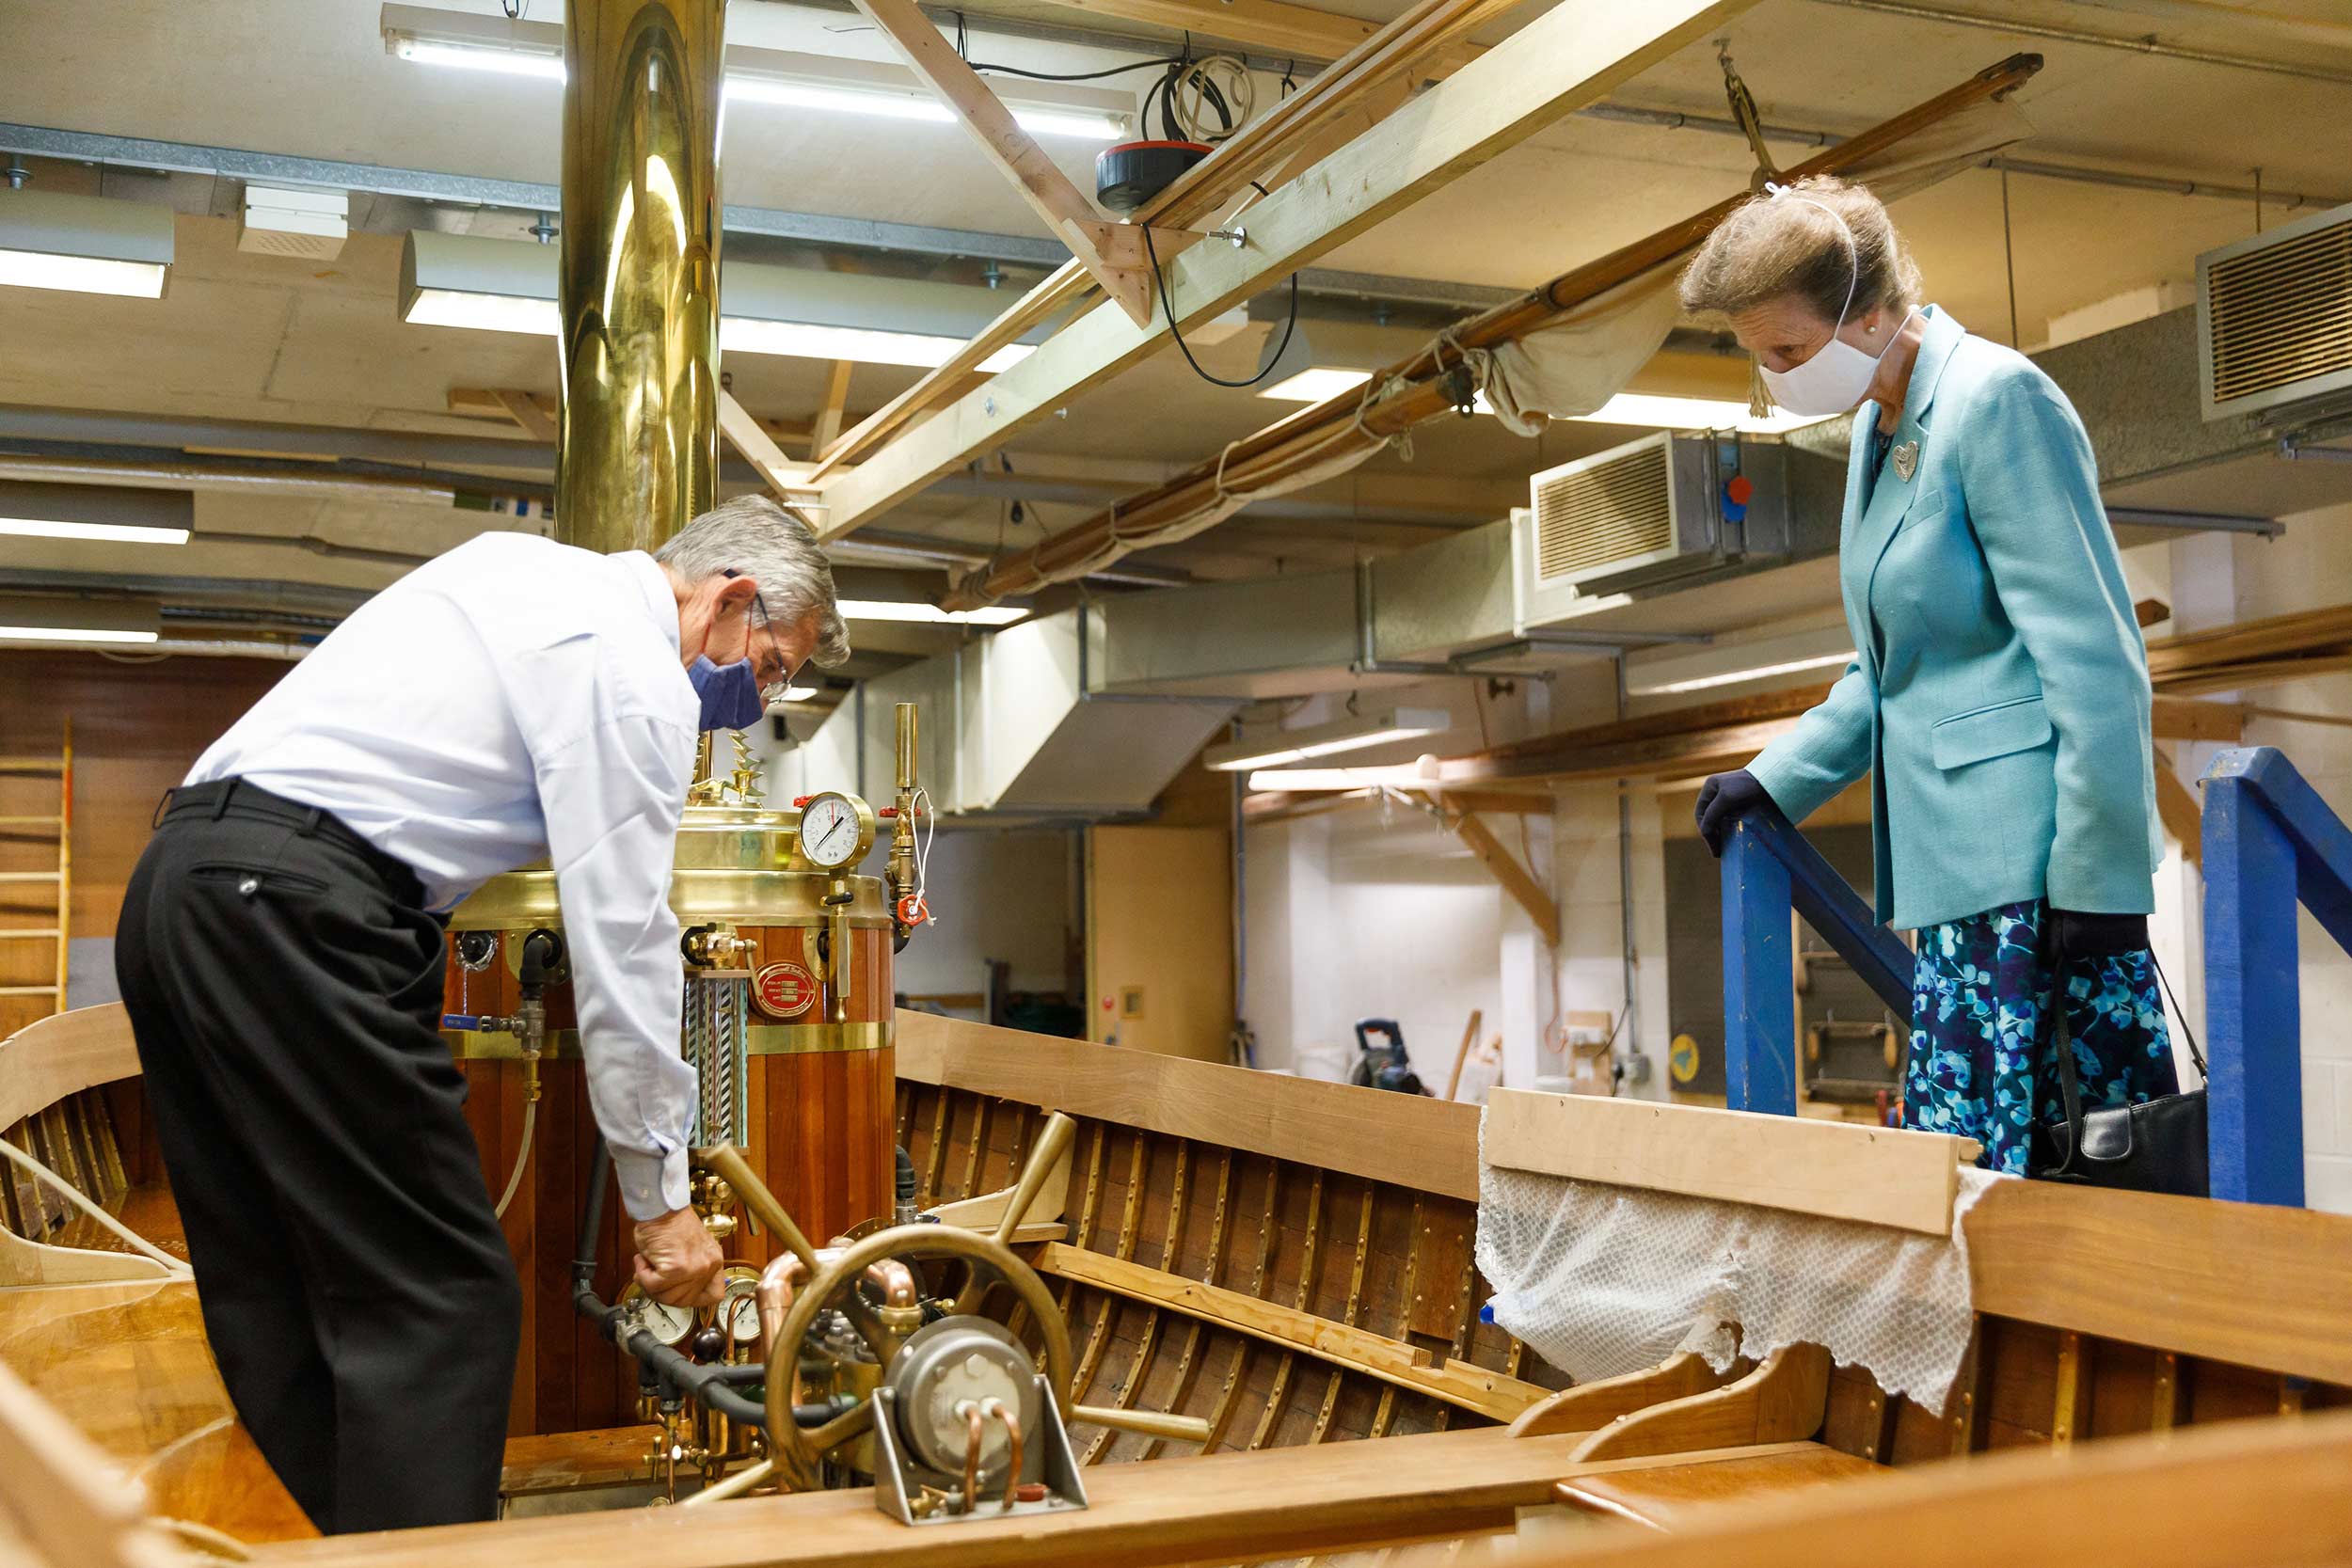 Princess Anne is shown a boat being worked on in the Museum's workshop.